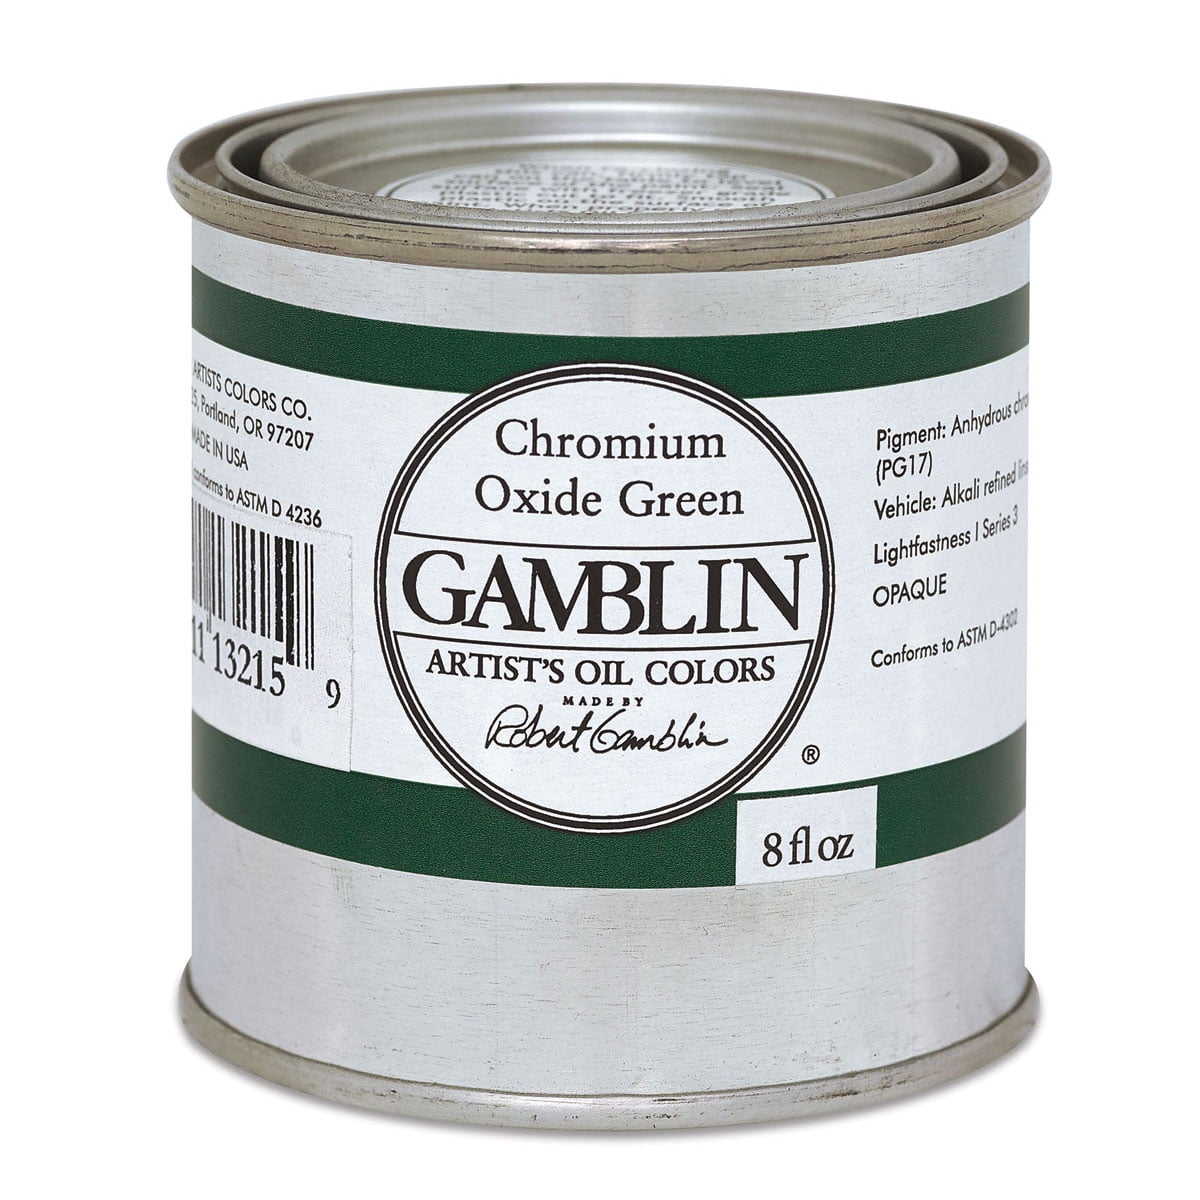 Gamblin Oil Painting Ground, 8oz - The Art Store/Commercial Art Supply